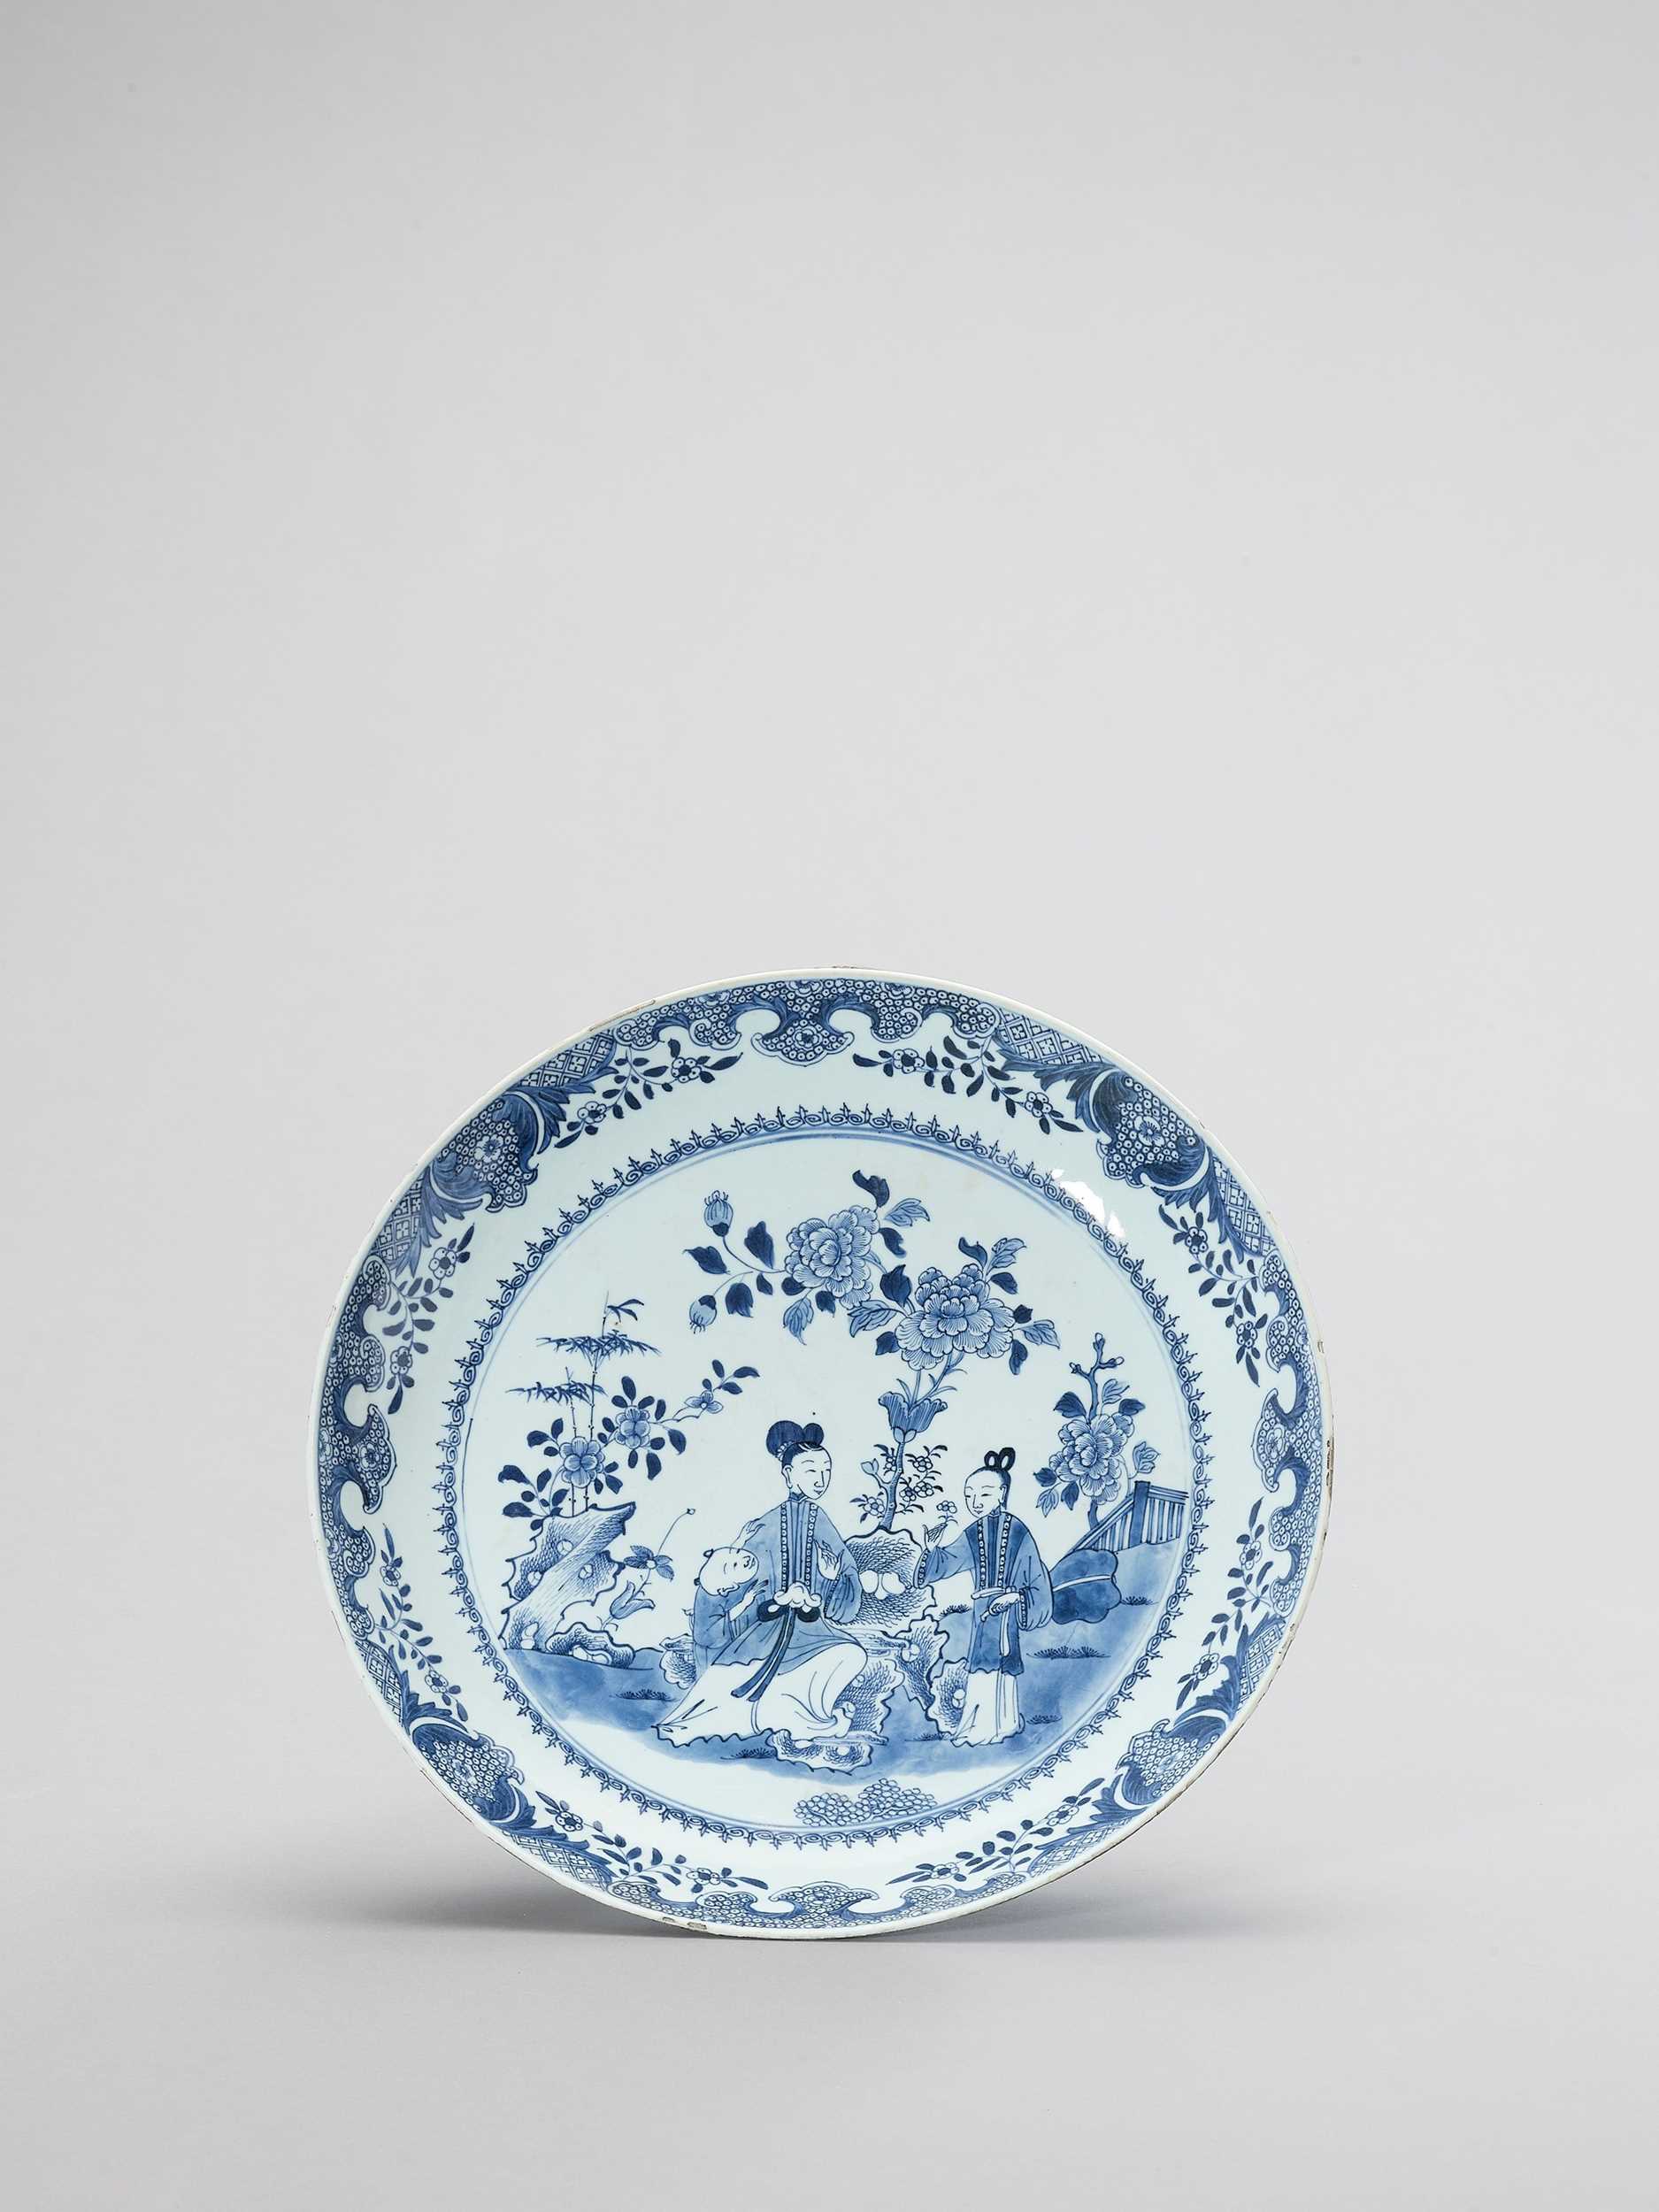 Lot 771 - A LARGE BLUE AND WHITE PORCELAIN CHARGER